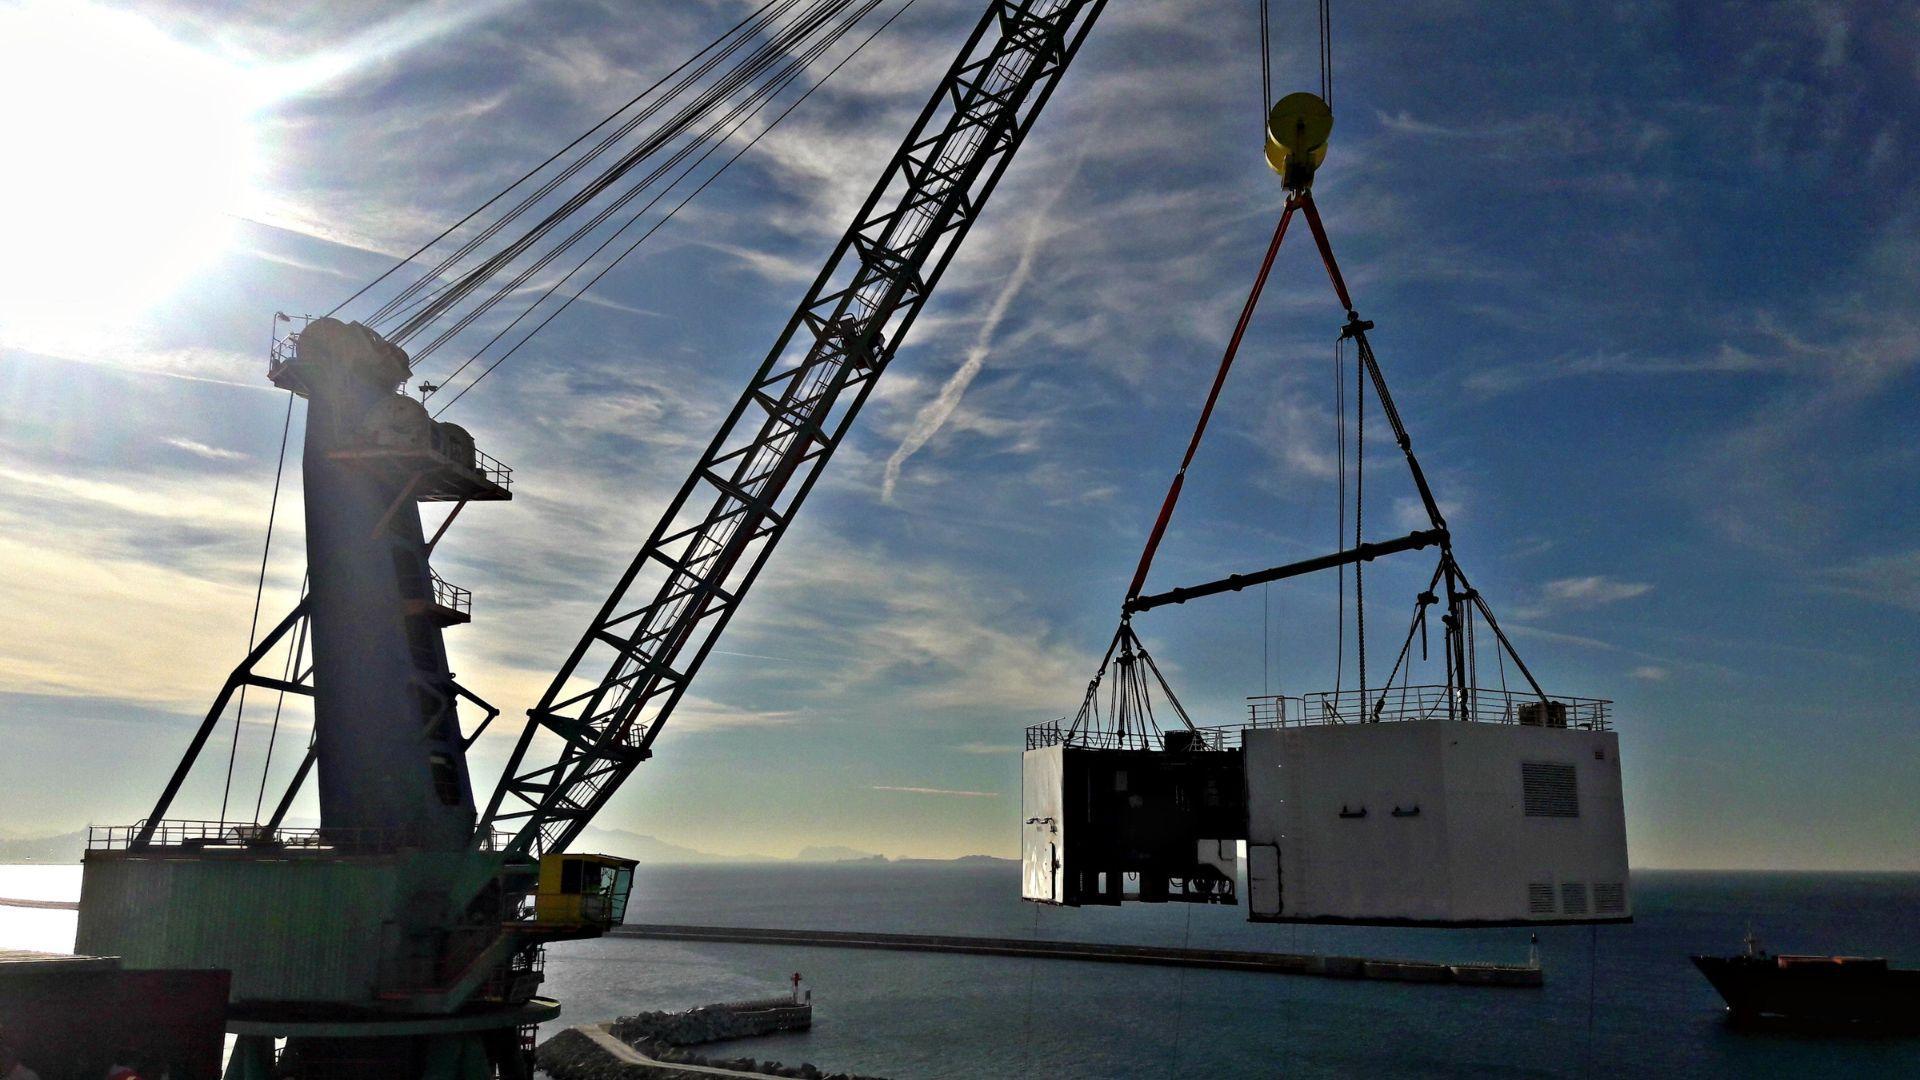 LGH Heavy Lifting Equipment in the Marine Industry